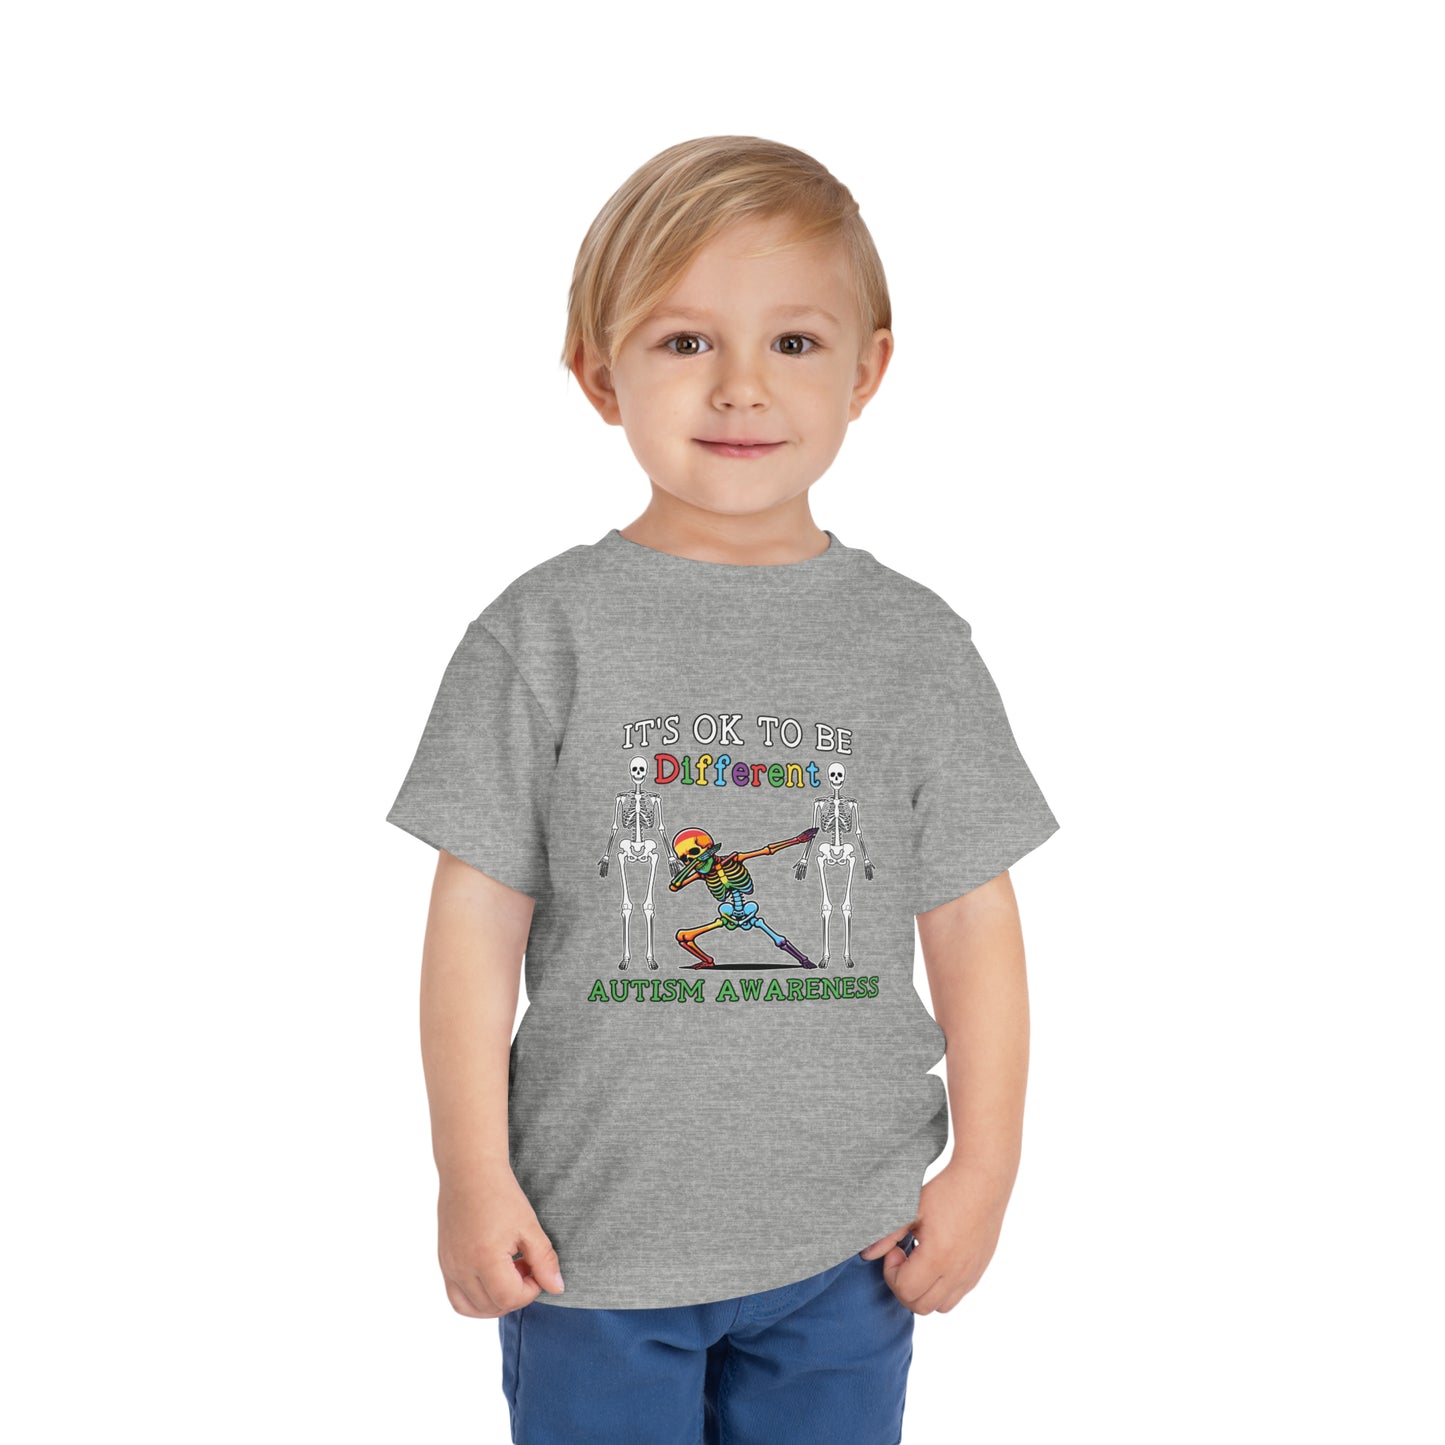 It's Okay to be different Autism Awareness Advocate Toddler Short Sleeve Tee